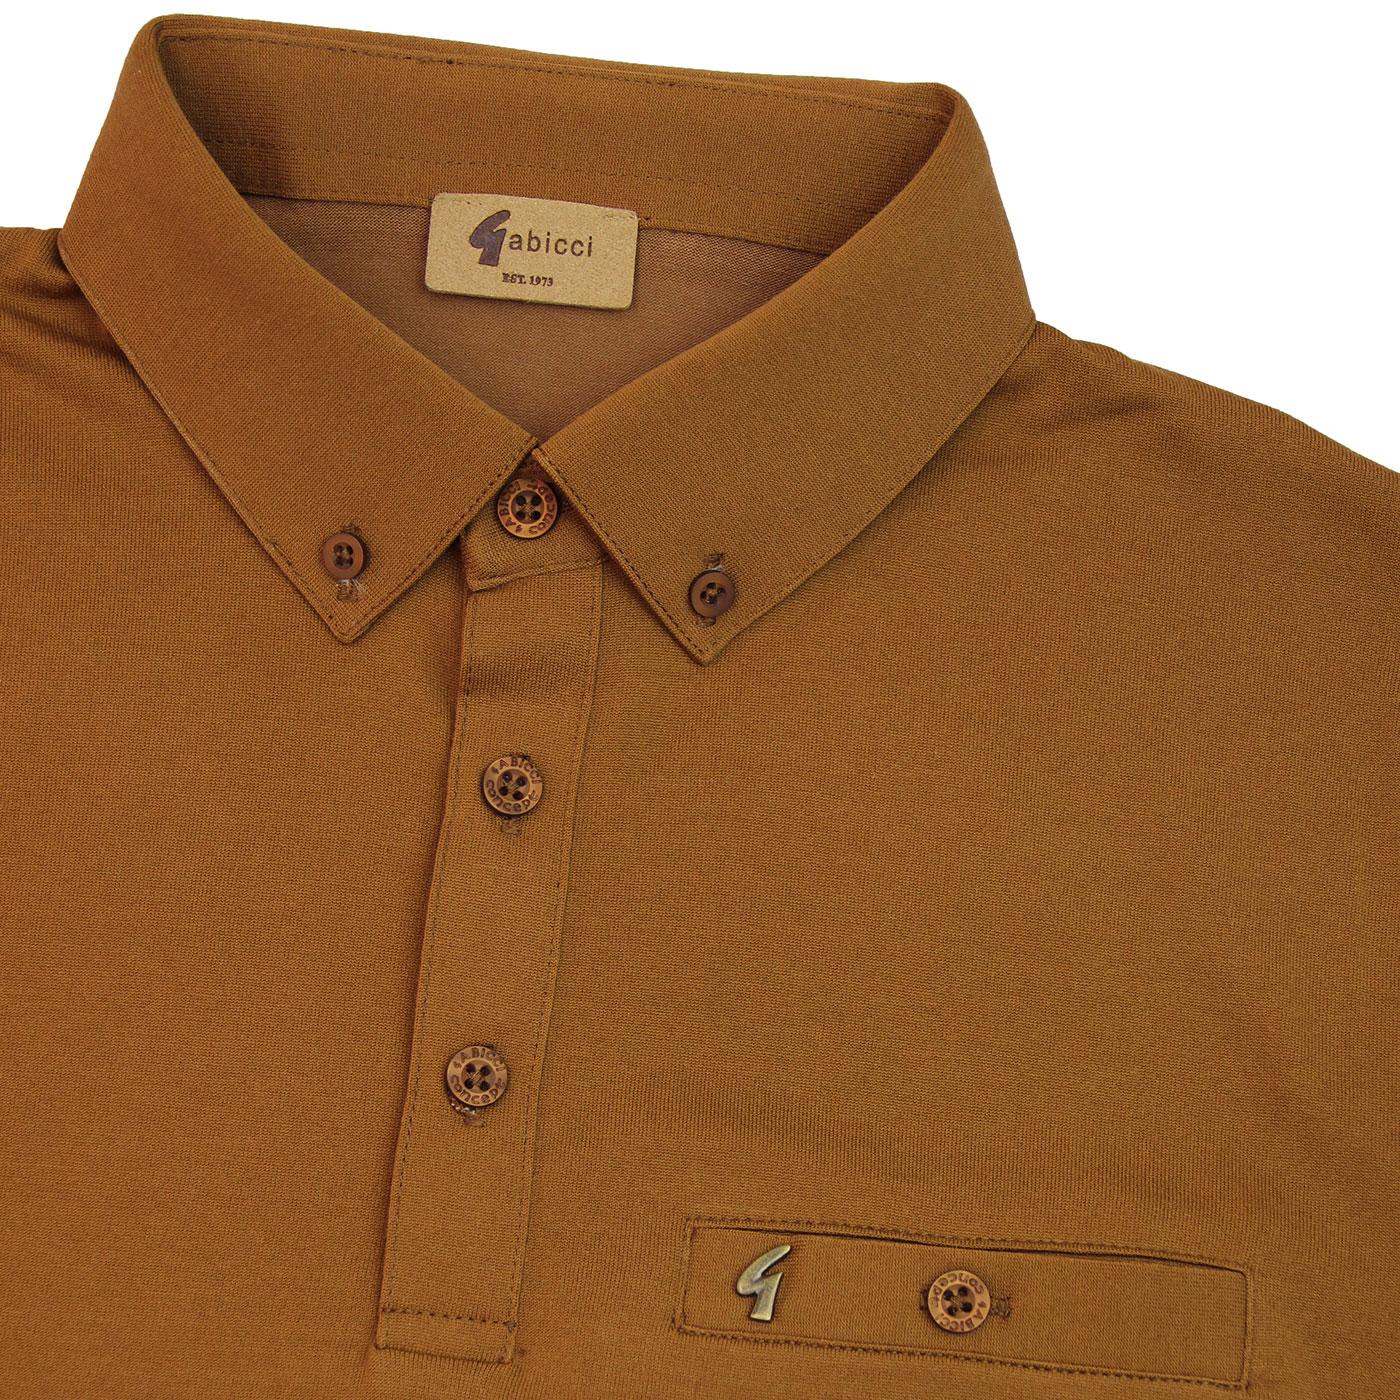 GABICCI VINTAGE Ladro 60s Mod Button Down Polo in Toffee